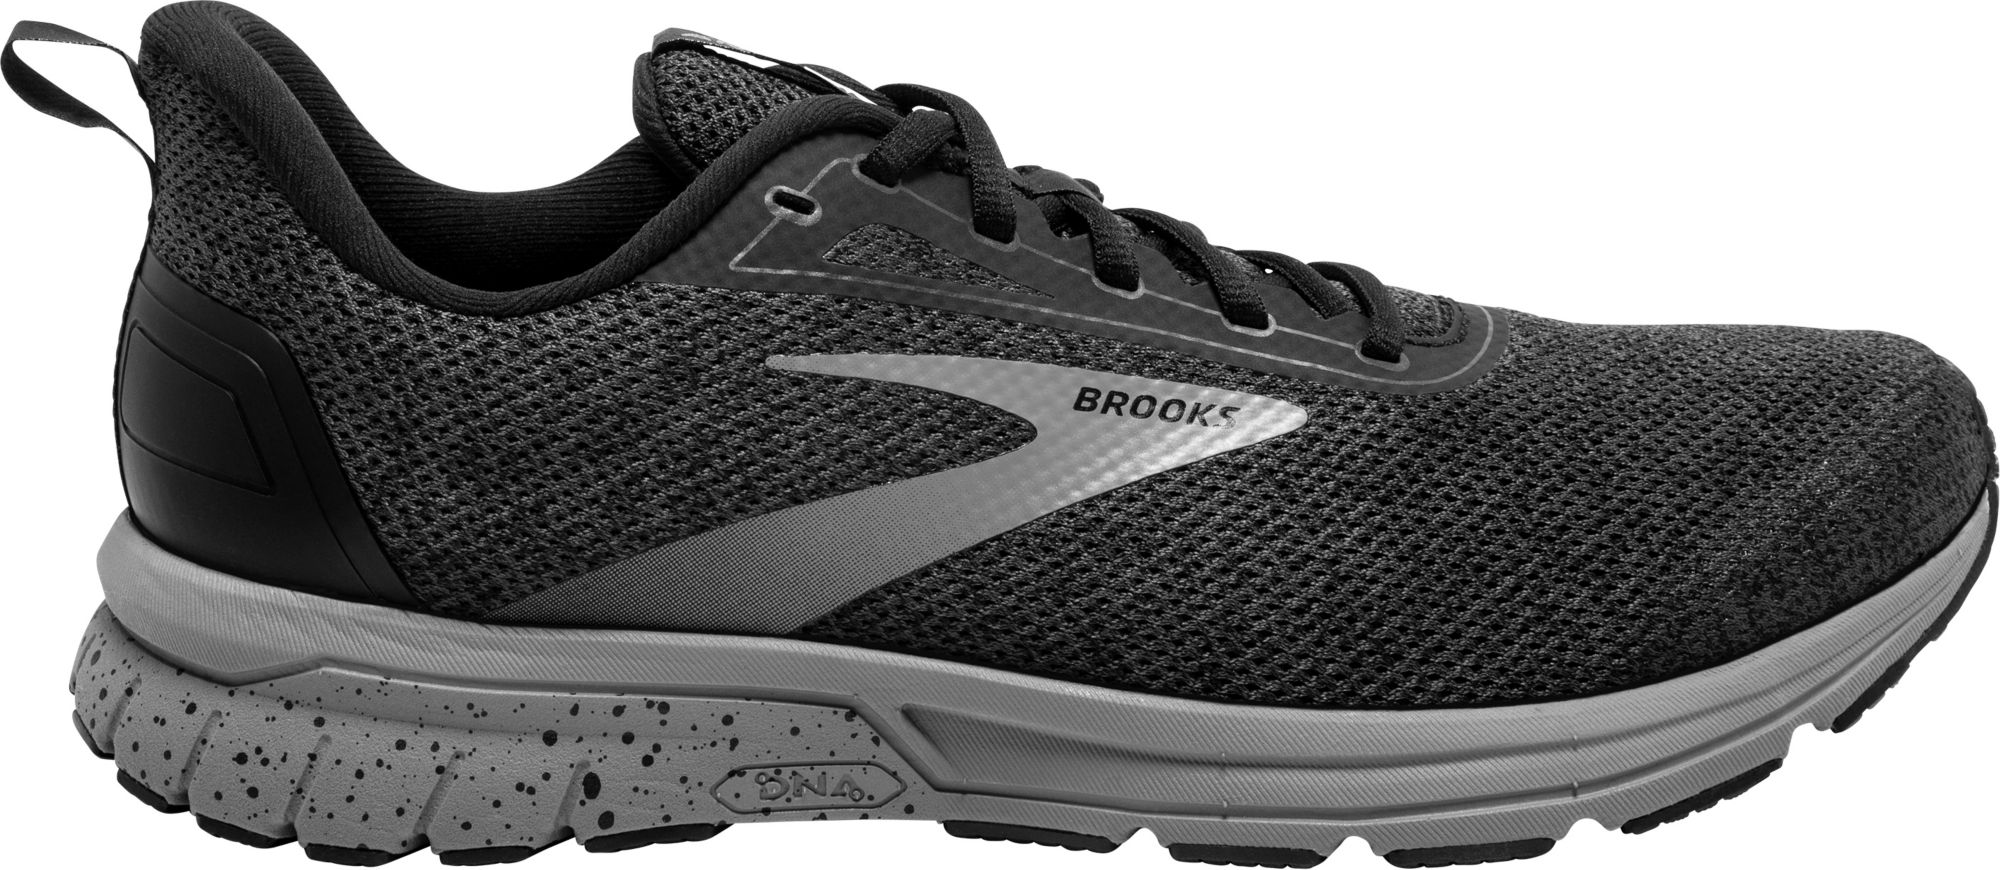 brooks shoes physical therapist discount